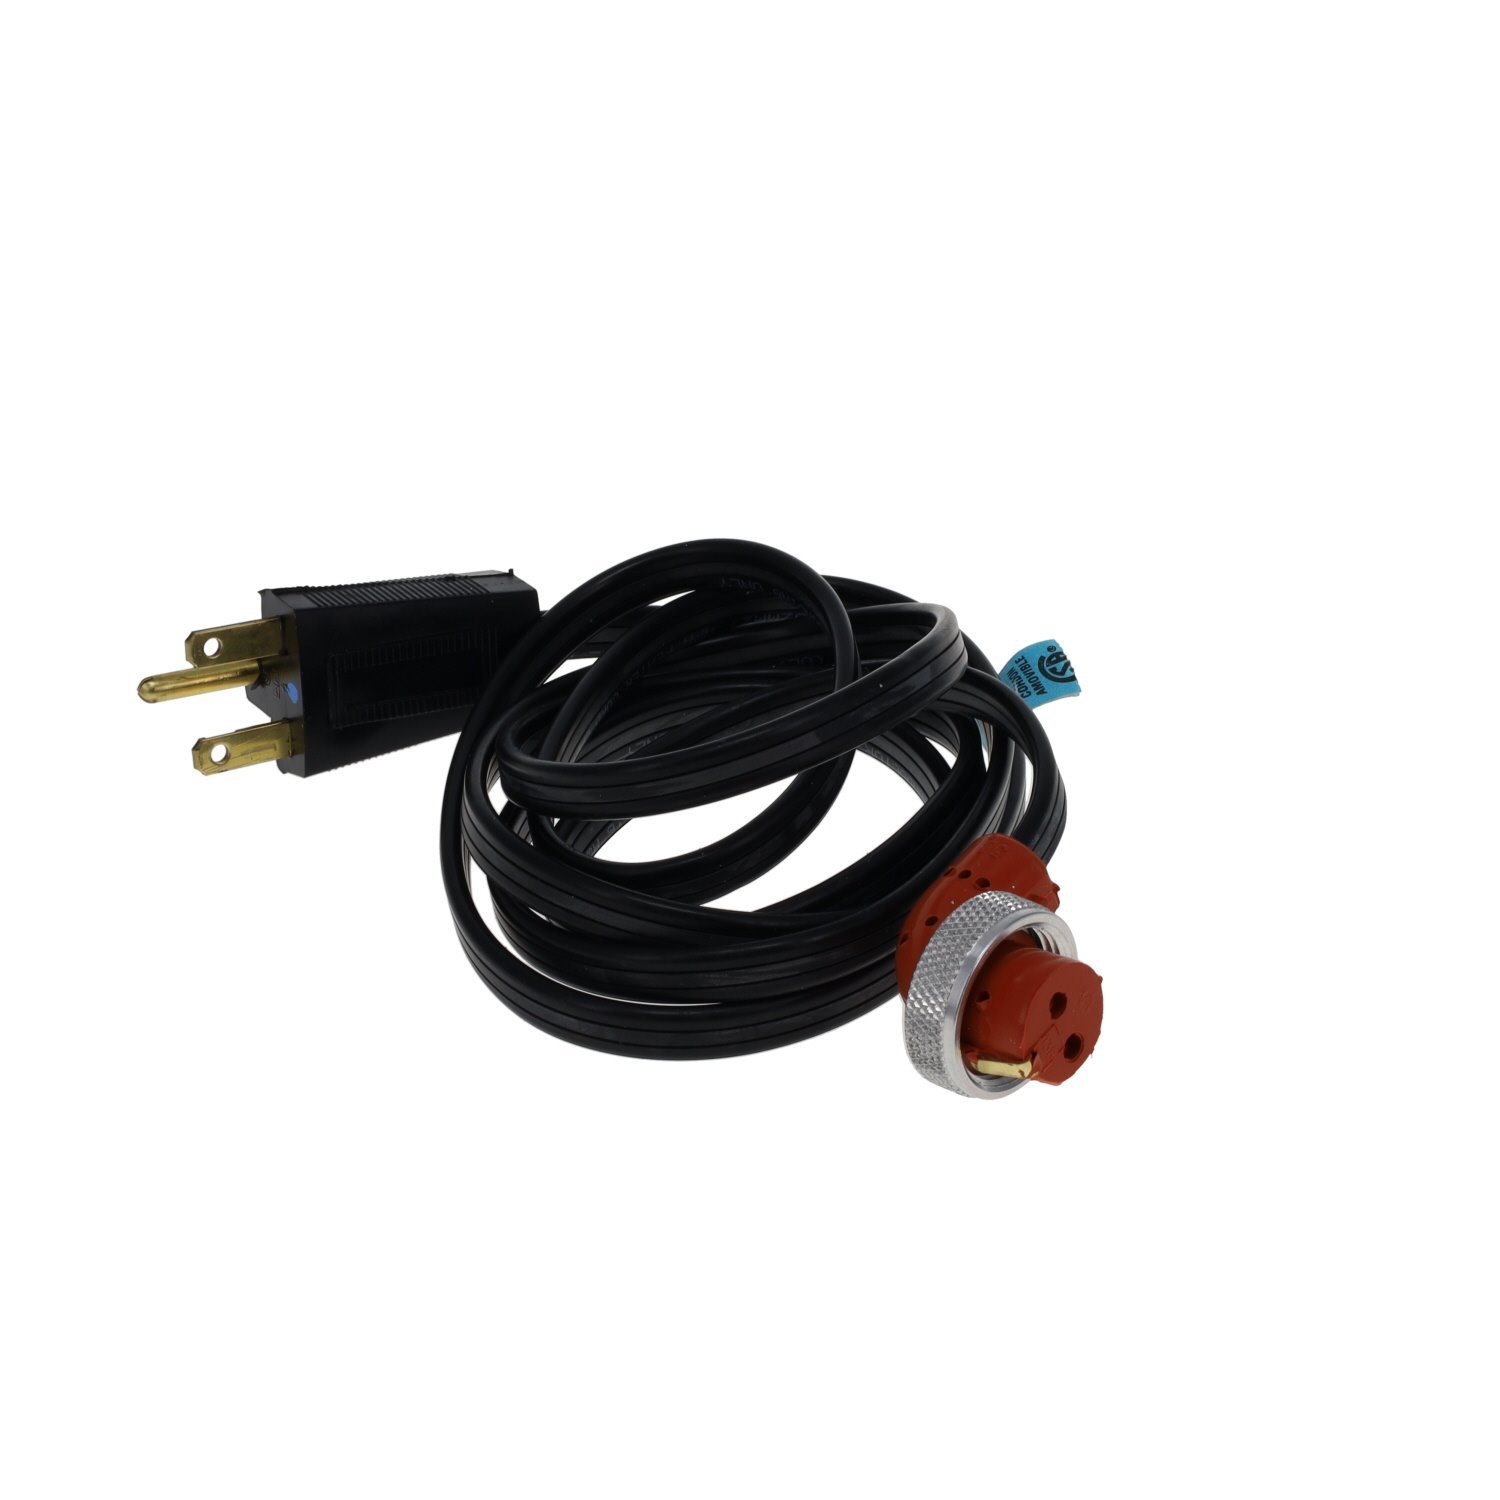 CORD FOR 08-1300